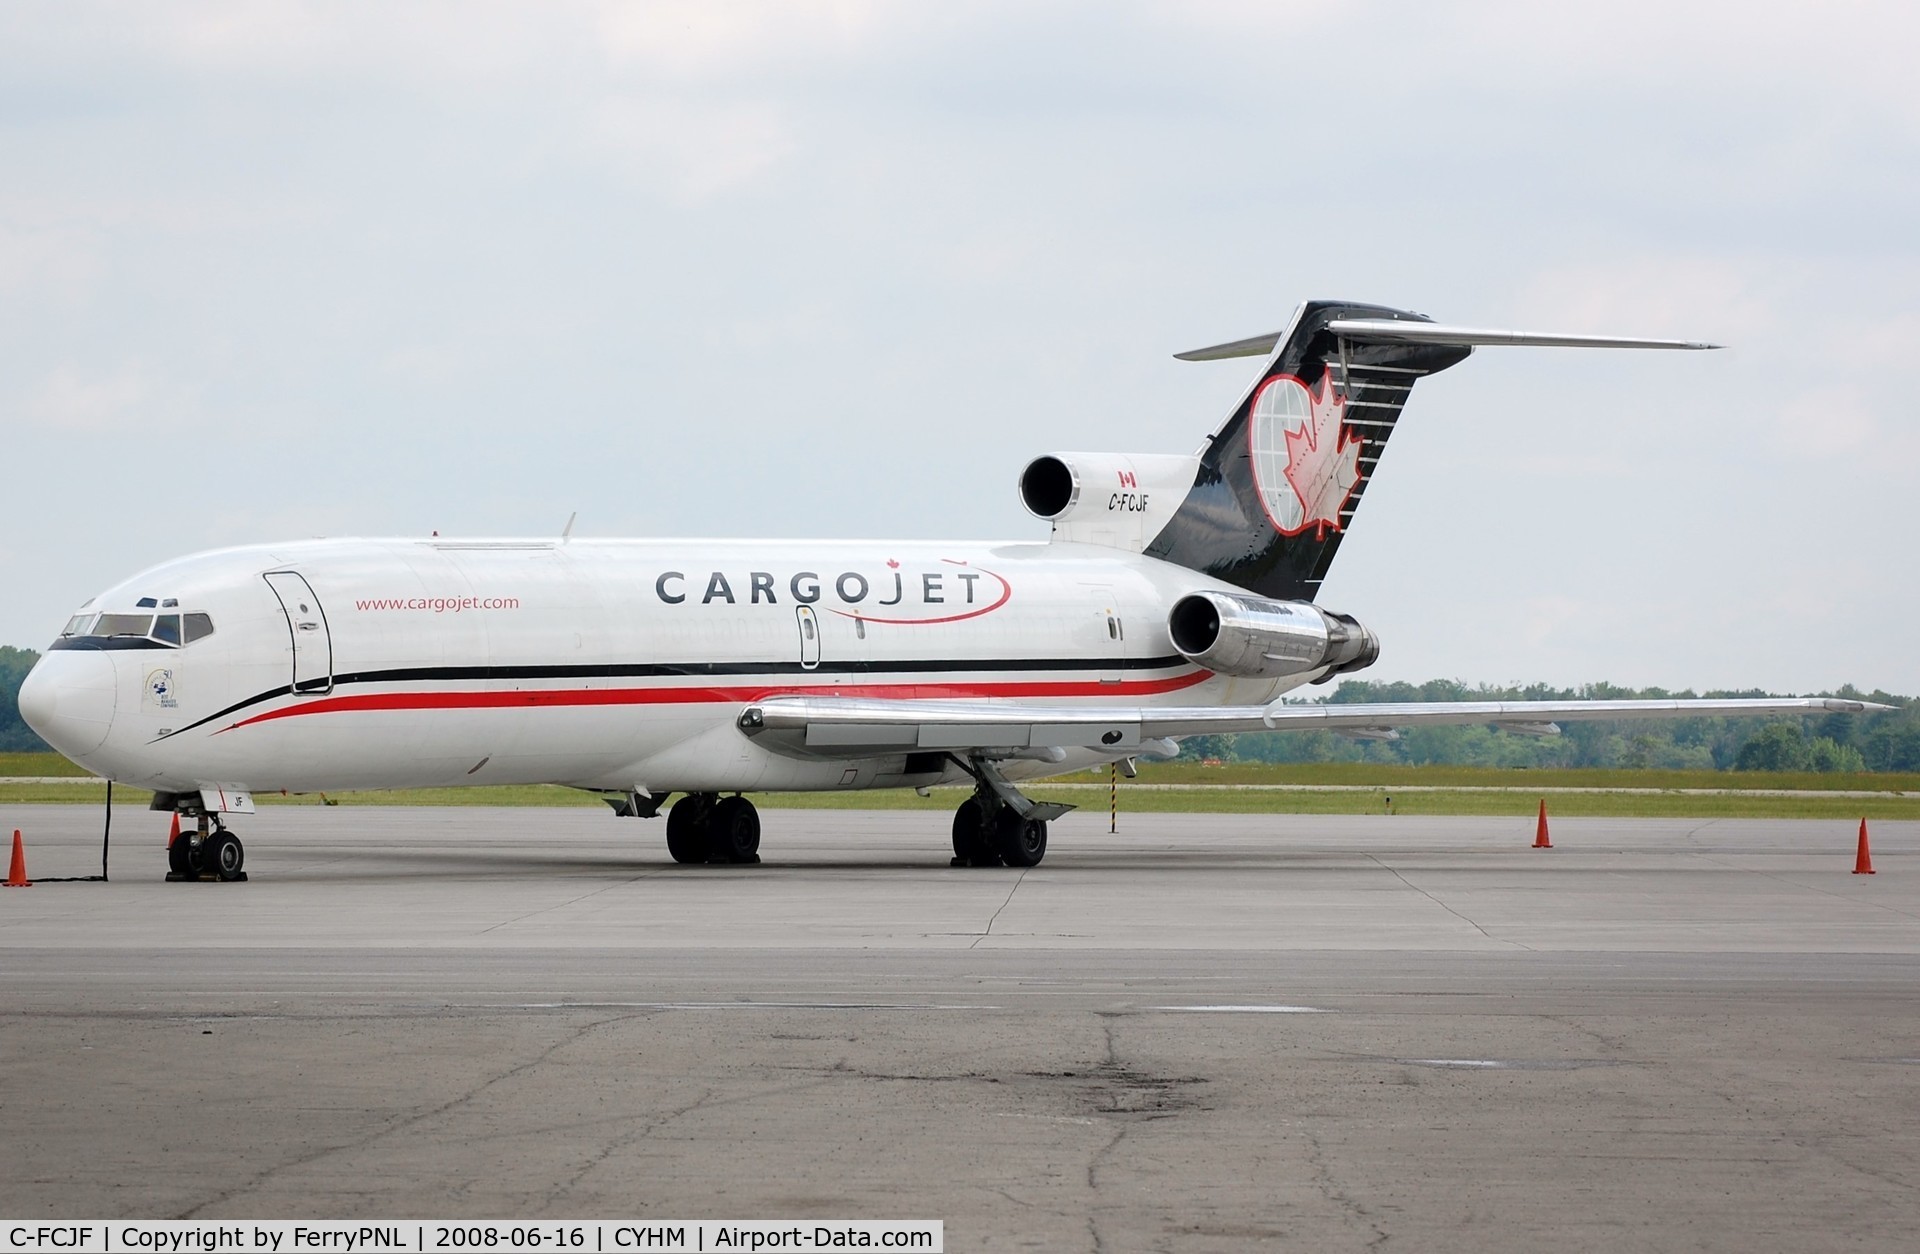 C-FCJF, 1980 Boeing 727-223 C/N 22011, Former AA B727 still operating in canada for Cargojet.